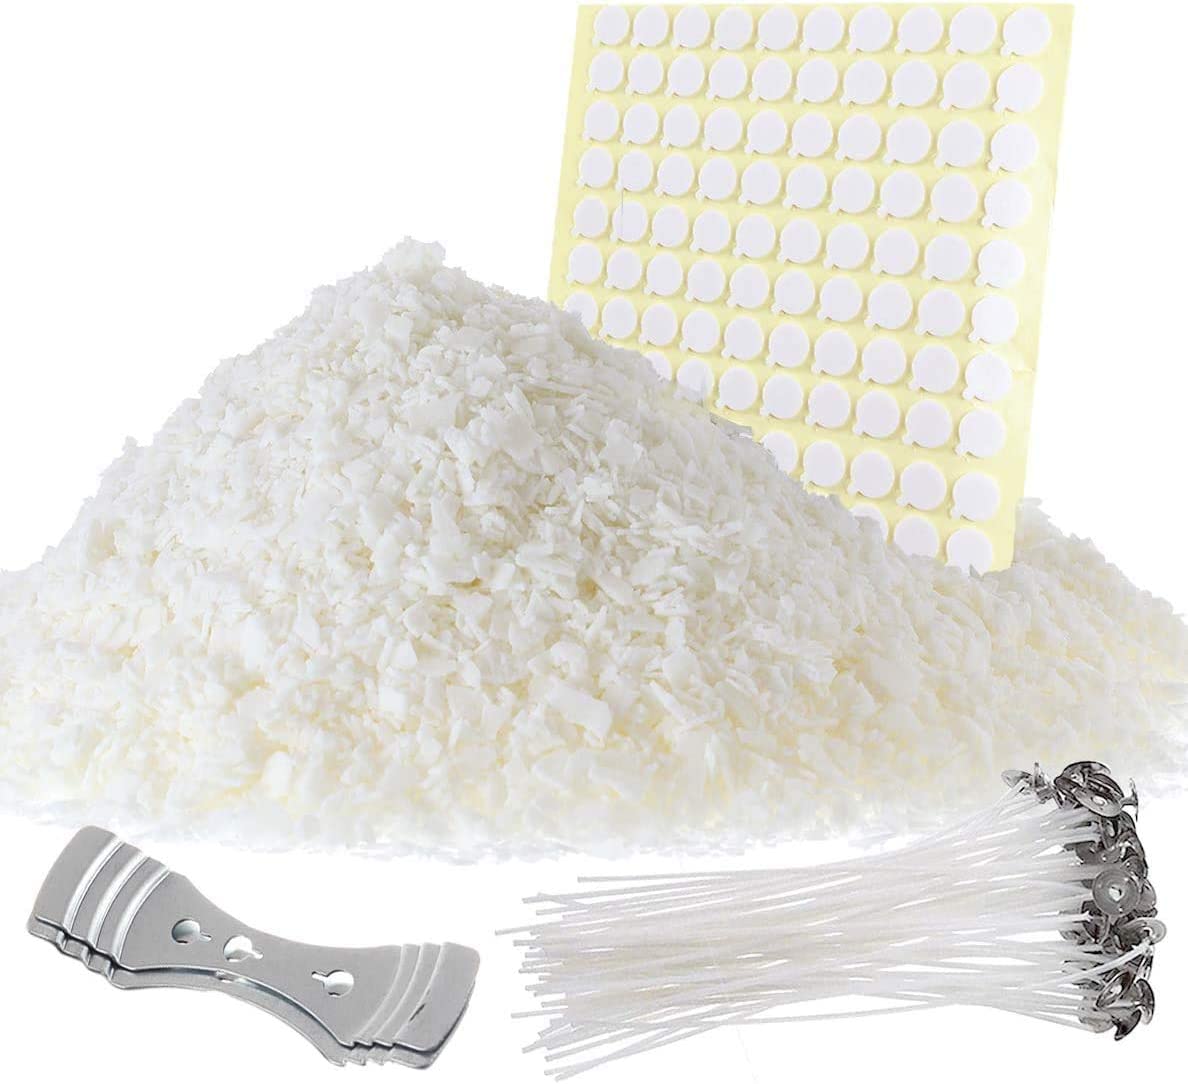 Etienne Alair Natural Soy Wax Kit – Includes; 10 Lbs Soy Candle Wax Flakes, 100 Cotton Wicks, 2 Wick Holders.